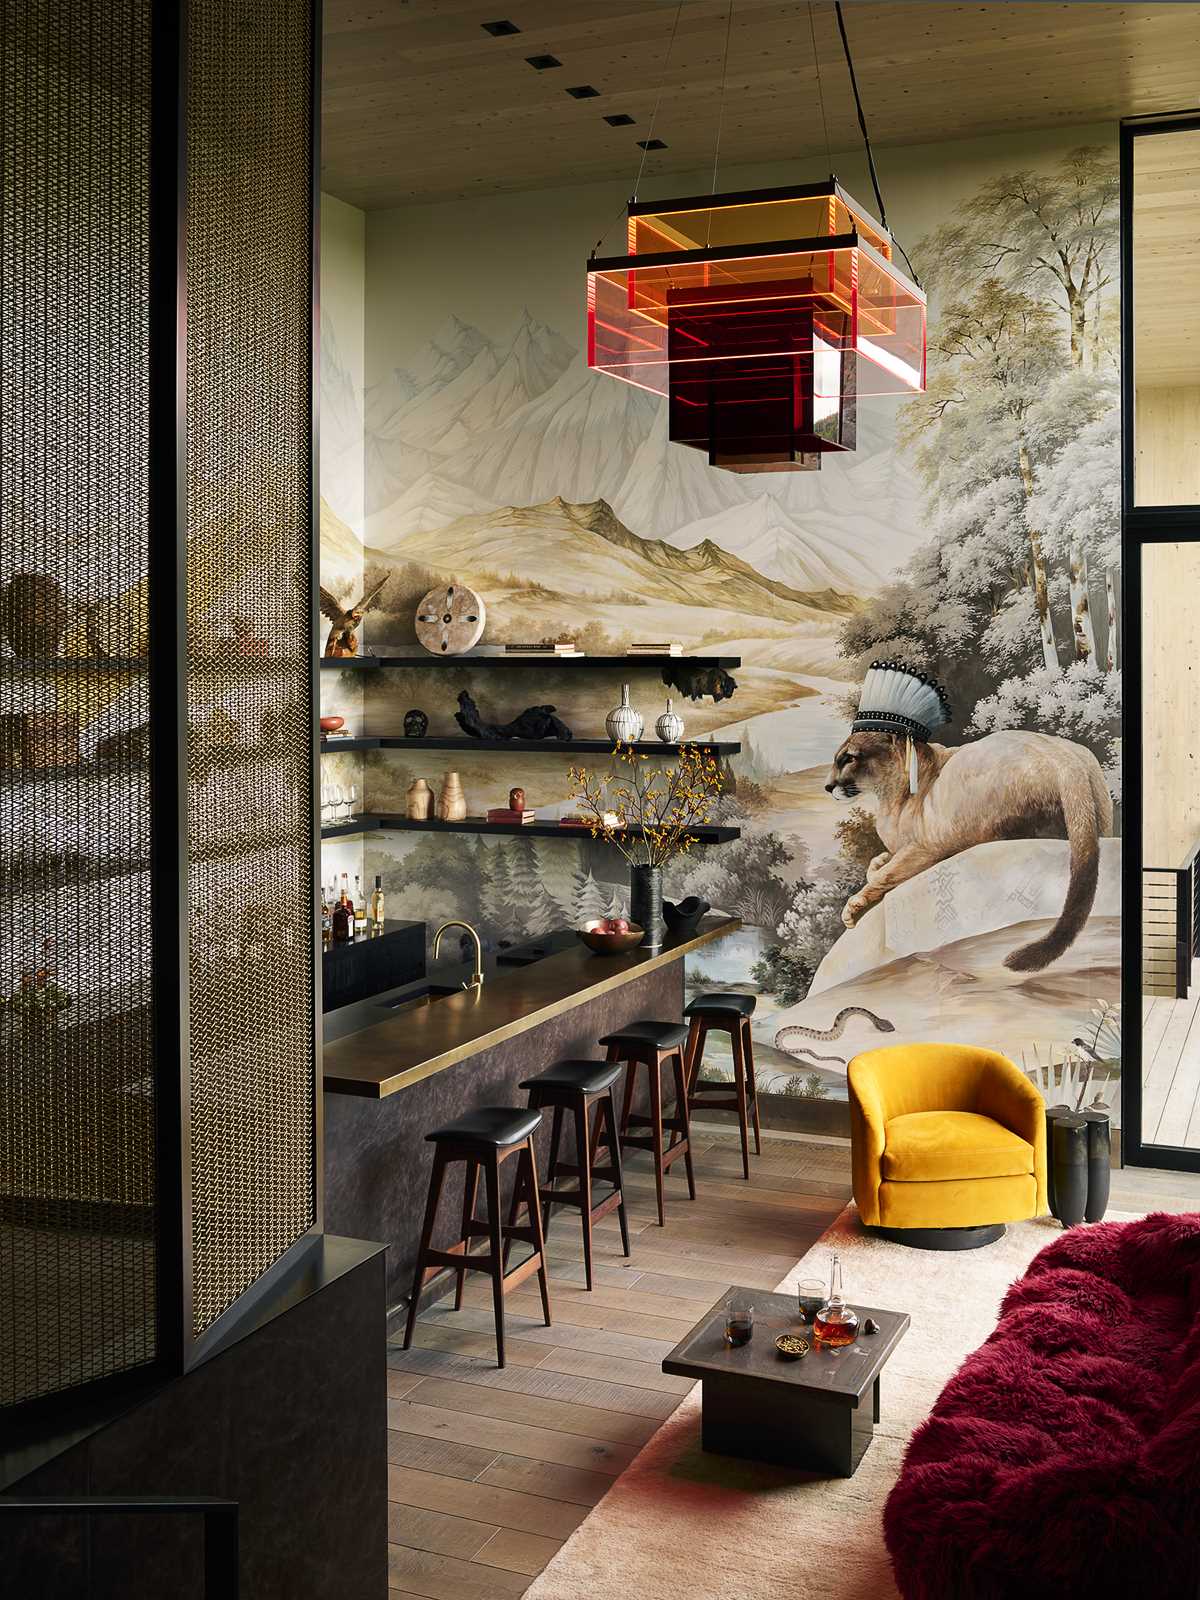 A bar and lounge features a hand-painted wallpaper mural from Aqualille, while the furnishings include open shelving and a custom sculptural chandelier by Johanna Grawunder.